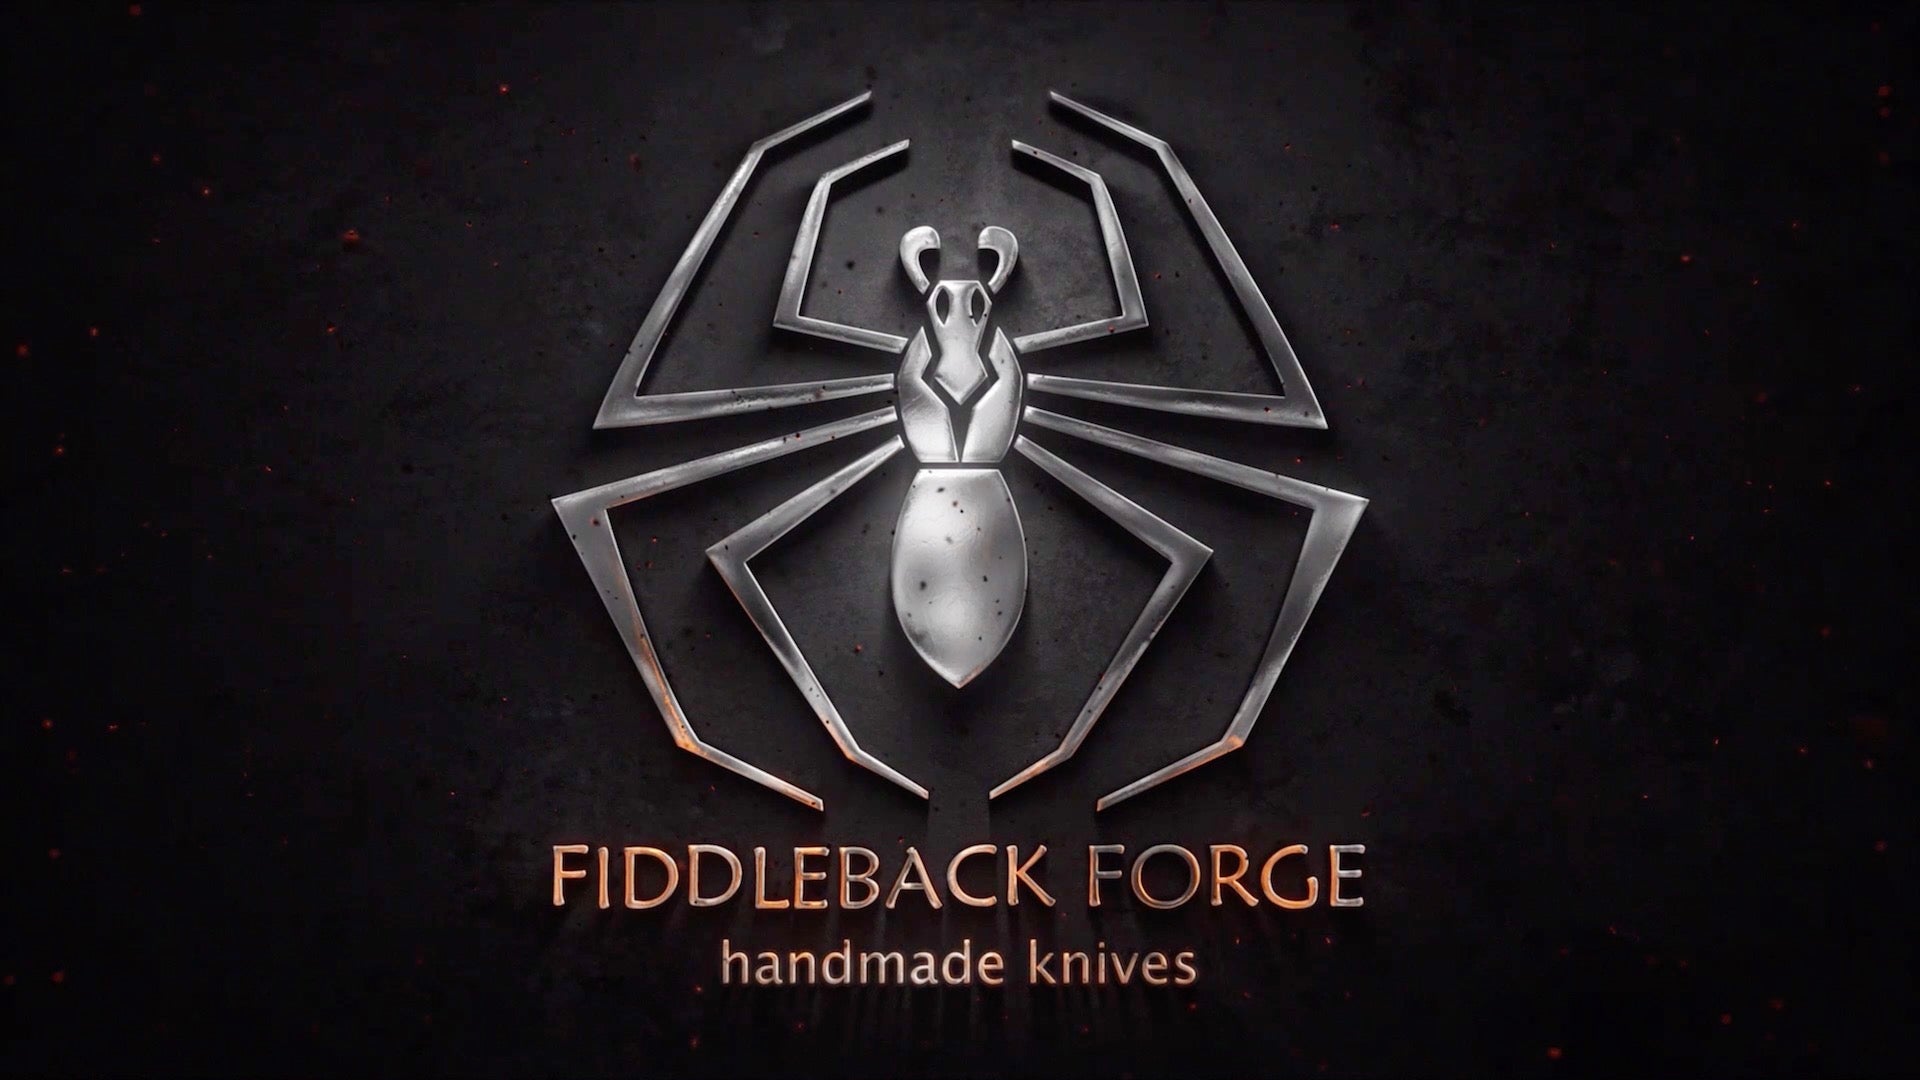 VIDEO: The Making of a Fiddleback Forge Knife